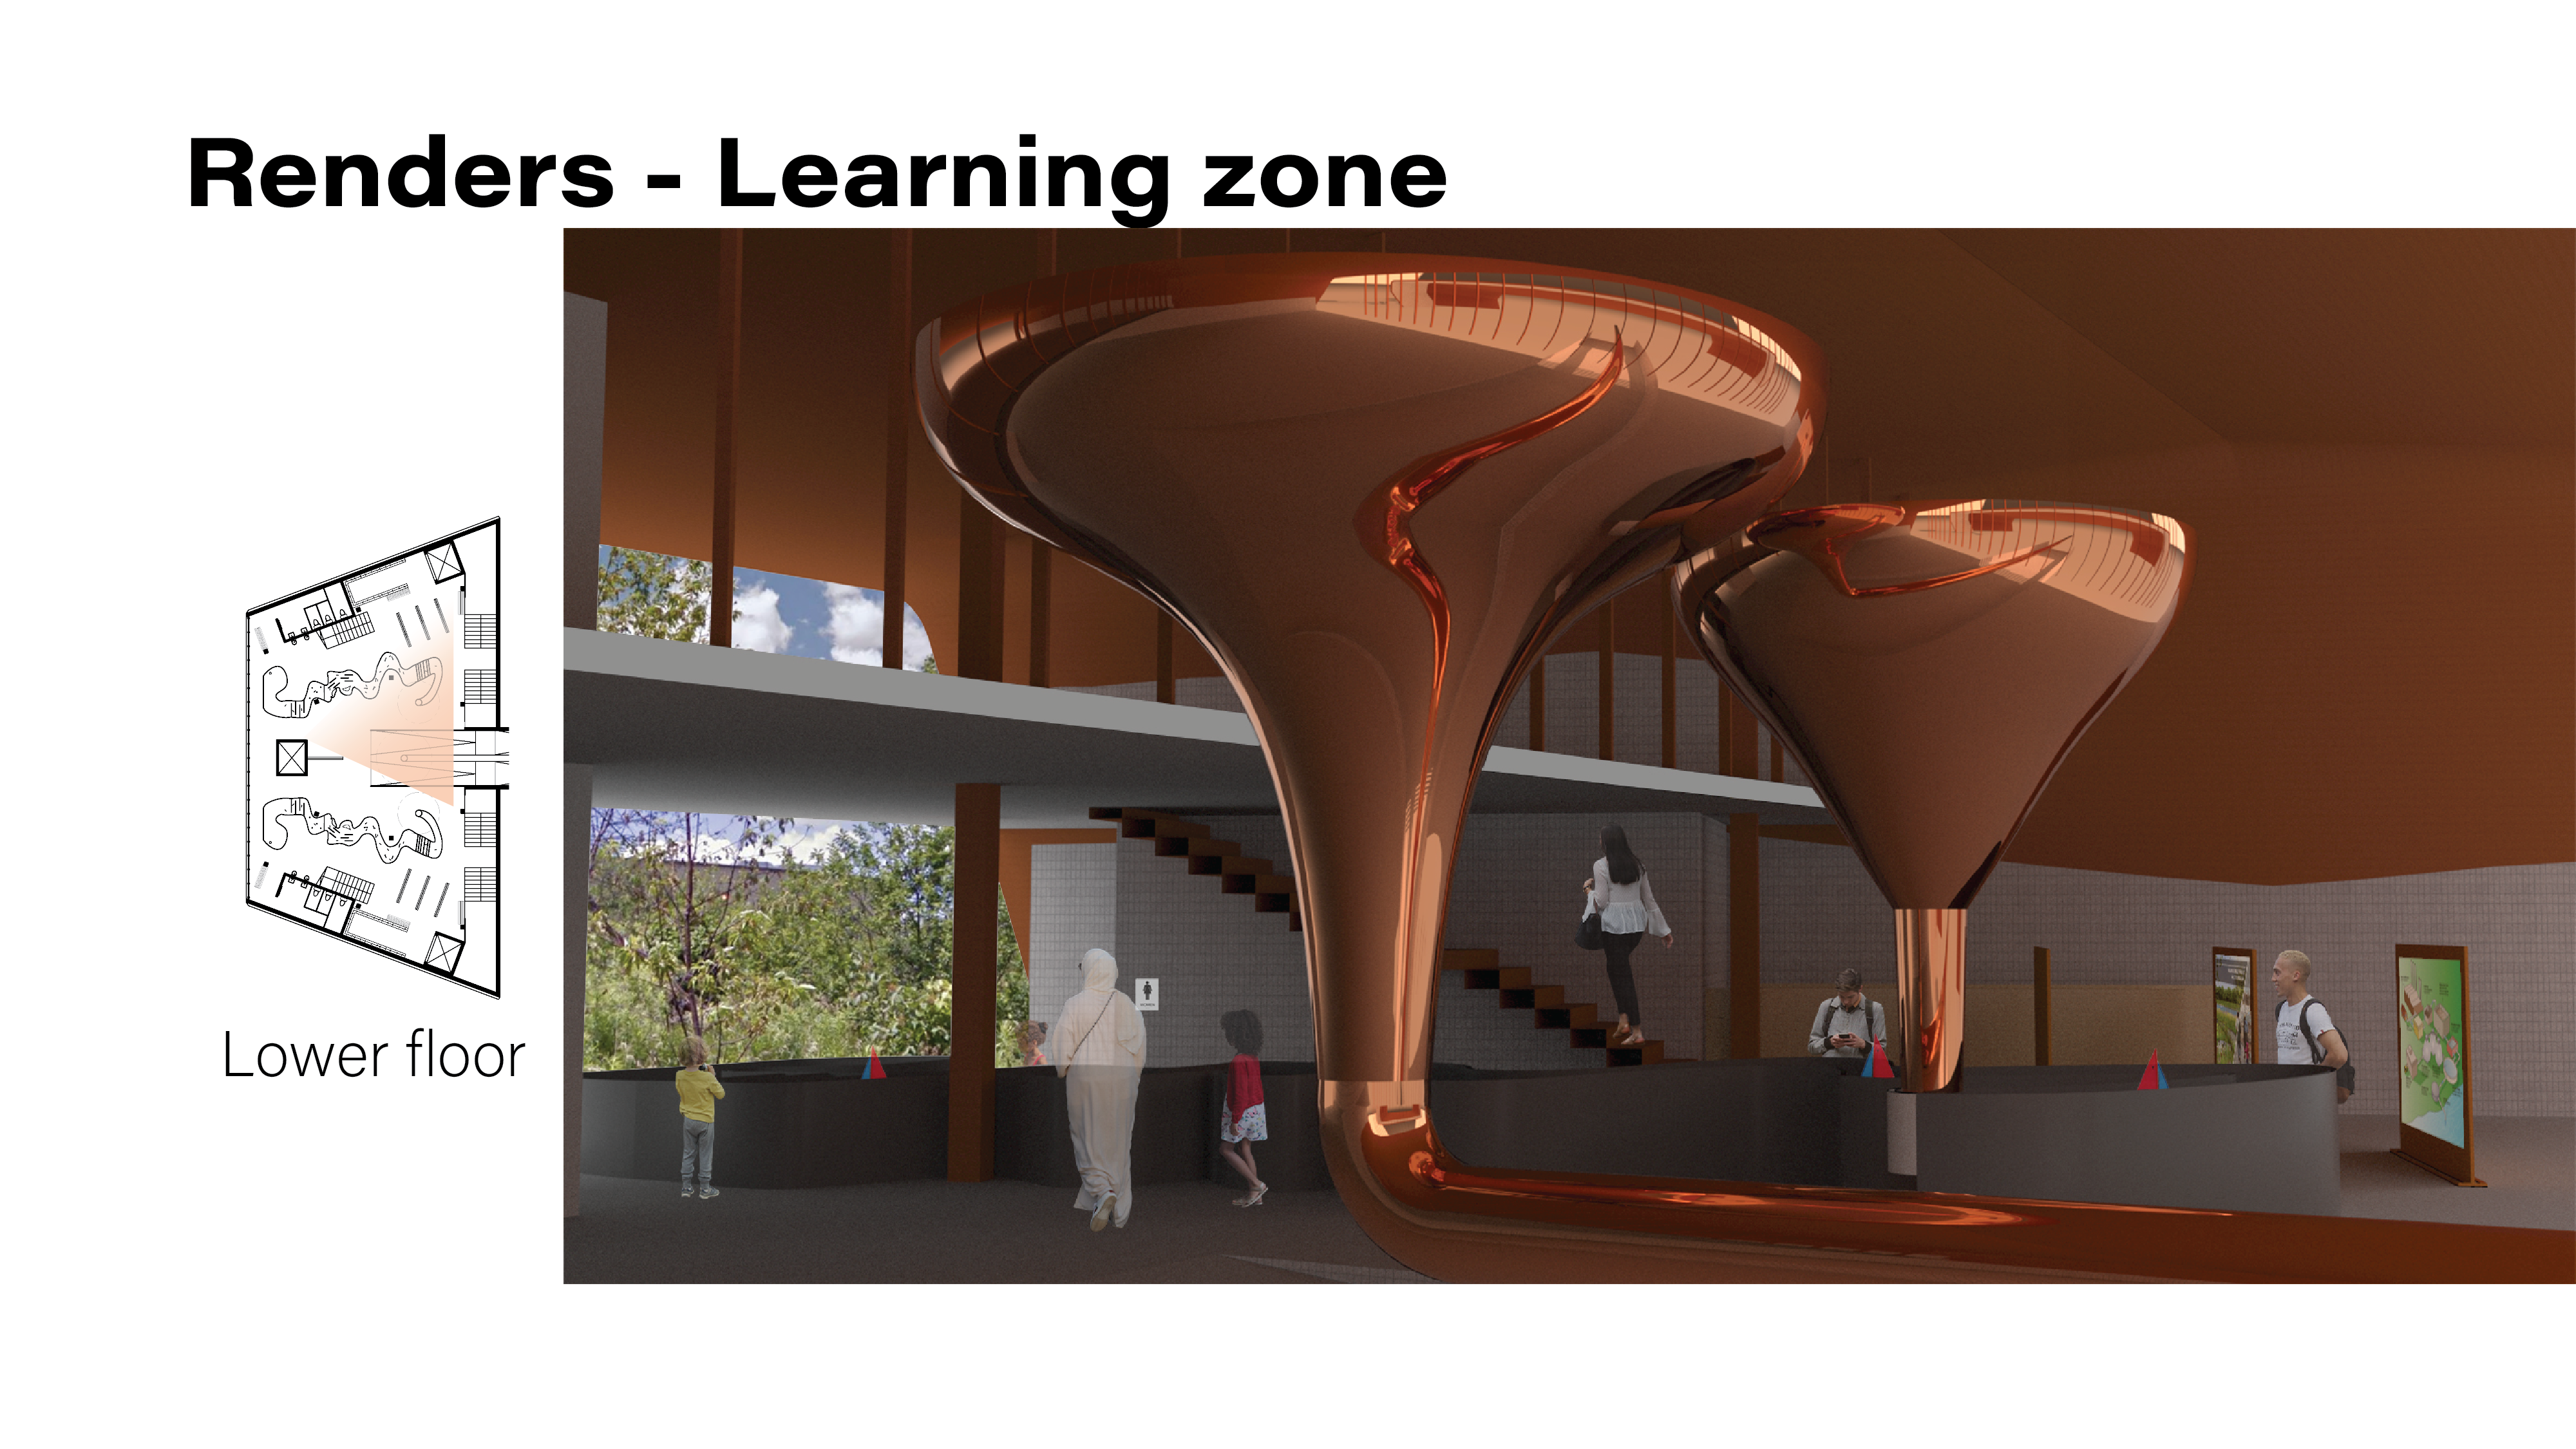 Learning zone